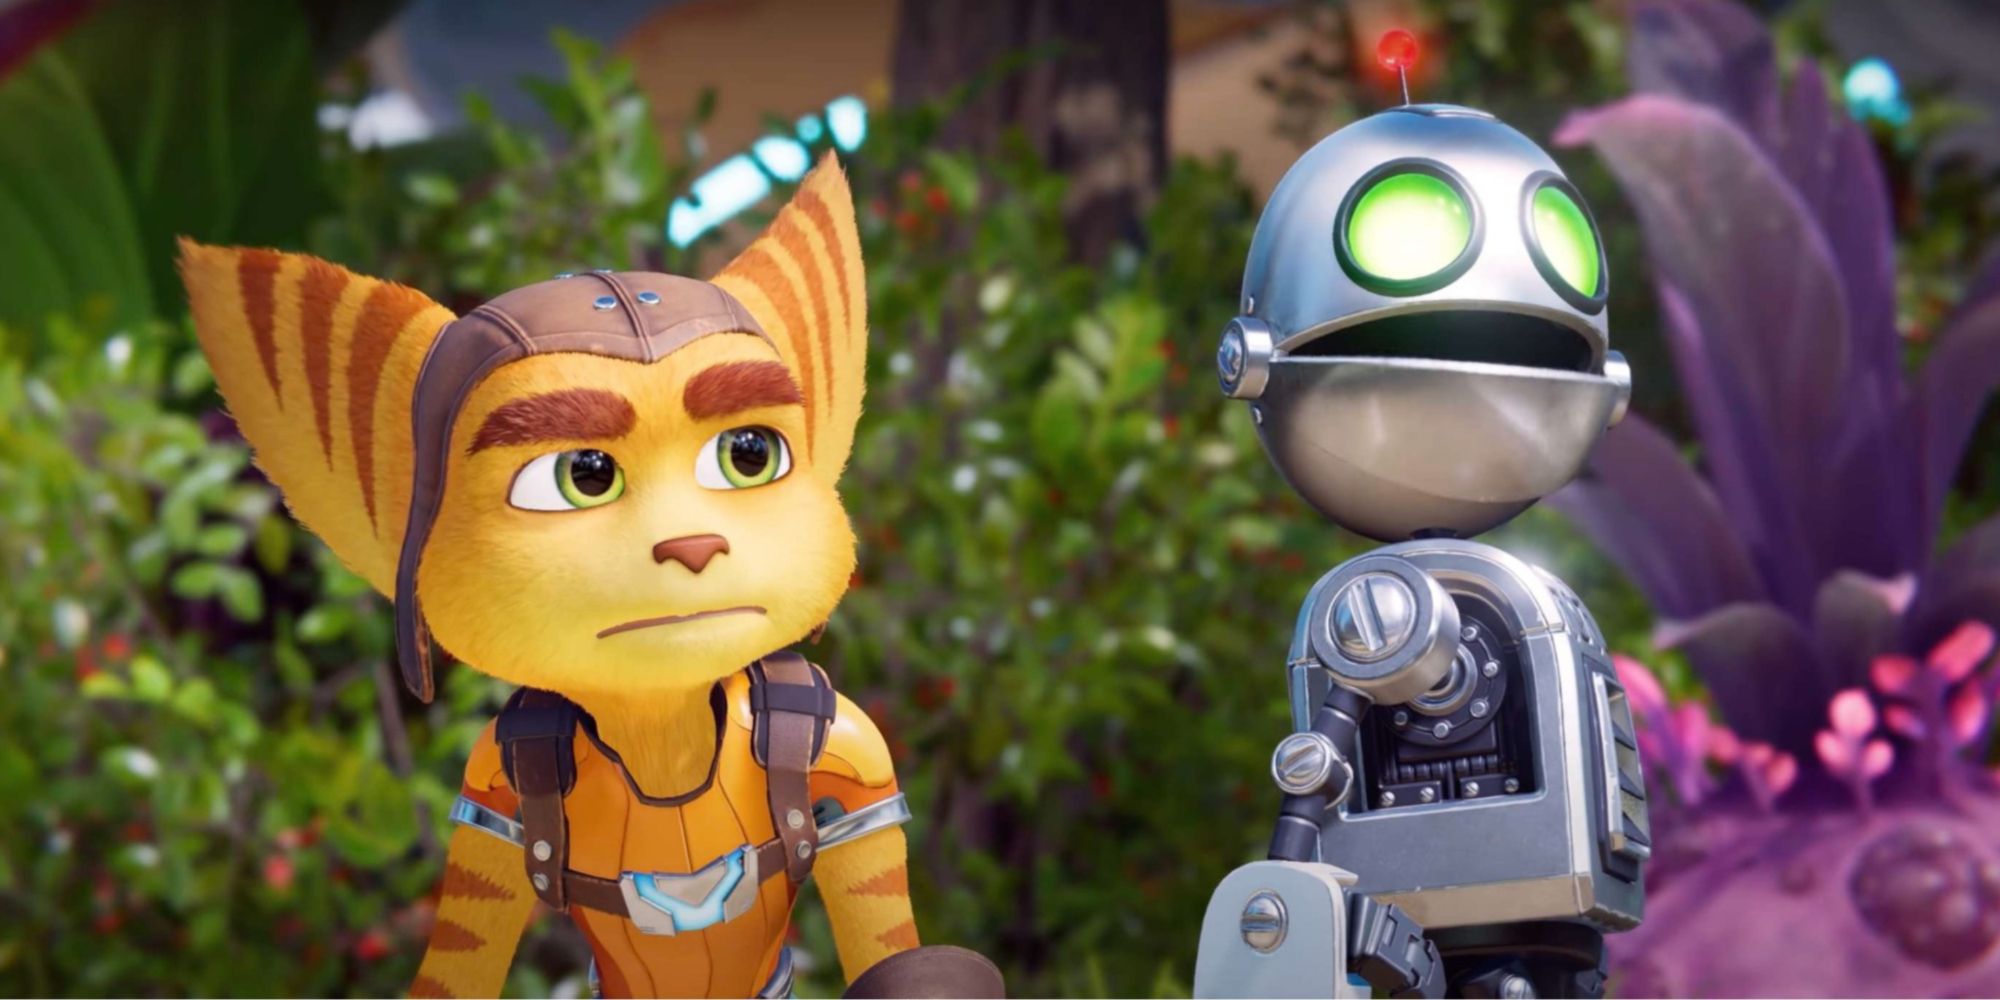 Ratchet and Clank side by side looking into the distance. There are bushes in the background and a purple plant.